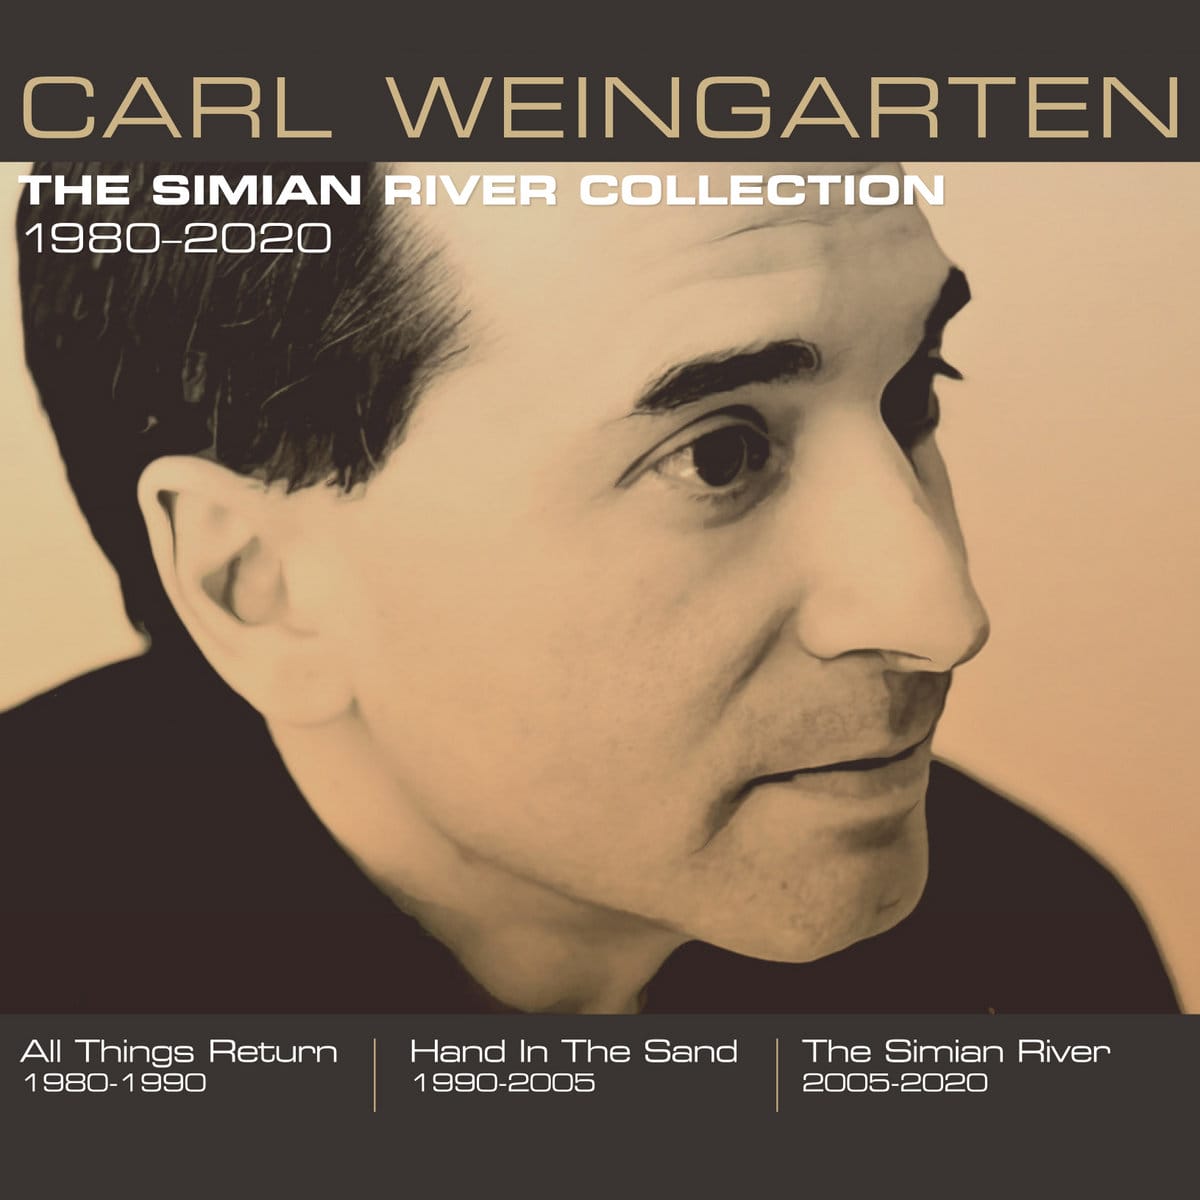 CARL WEINGARTEN: The Simian River Collection 1980─2020